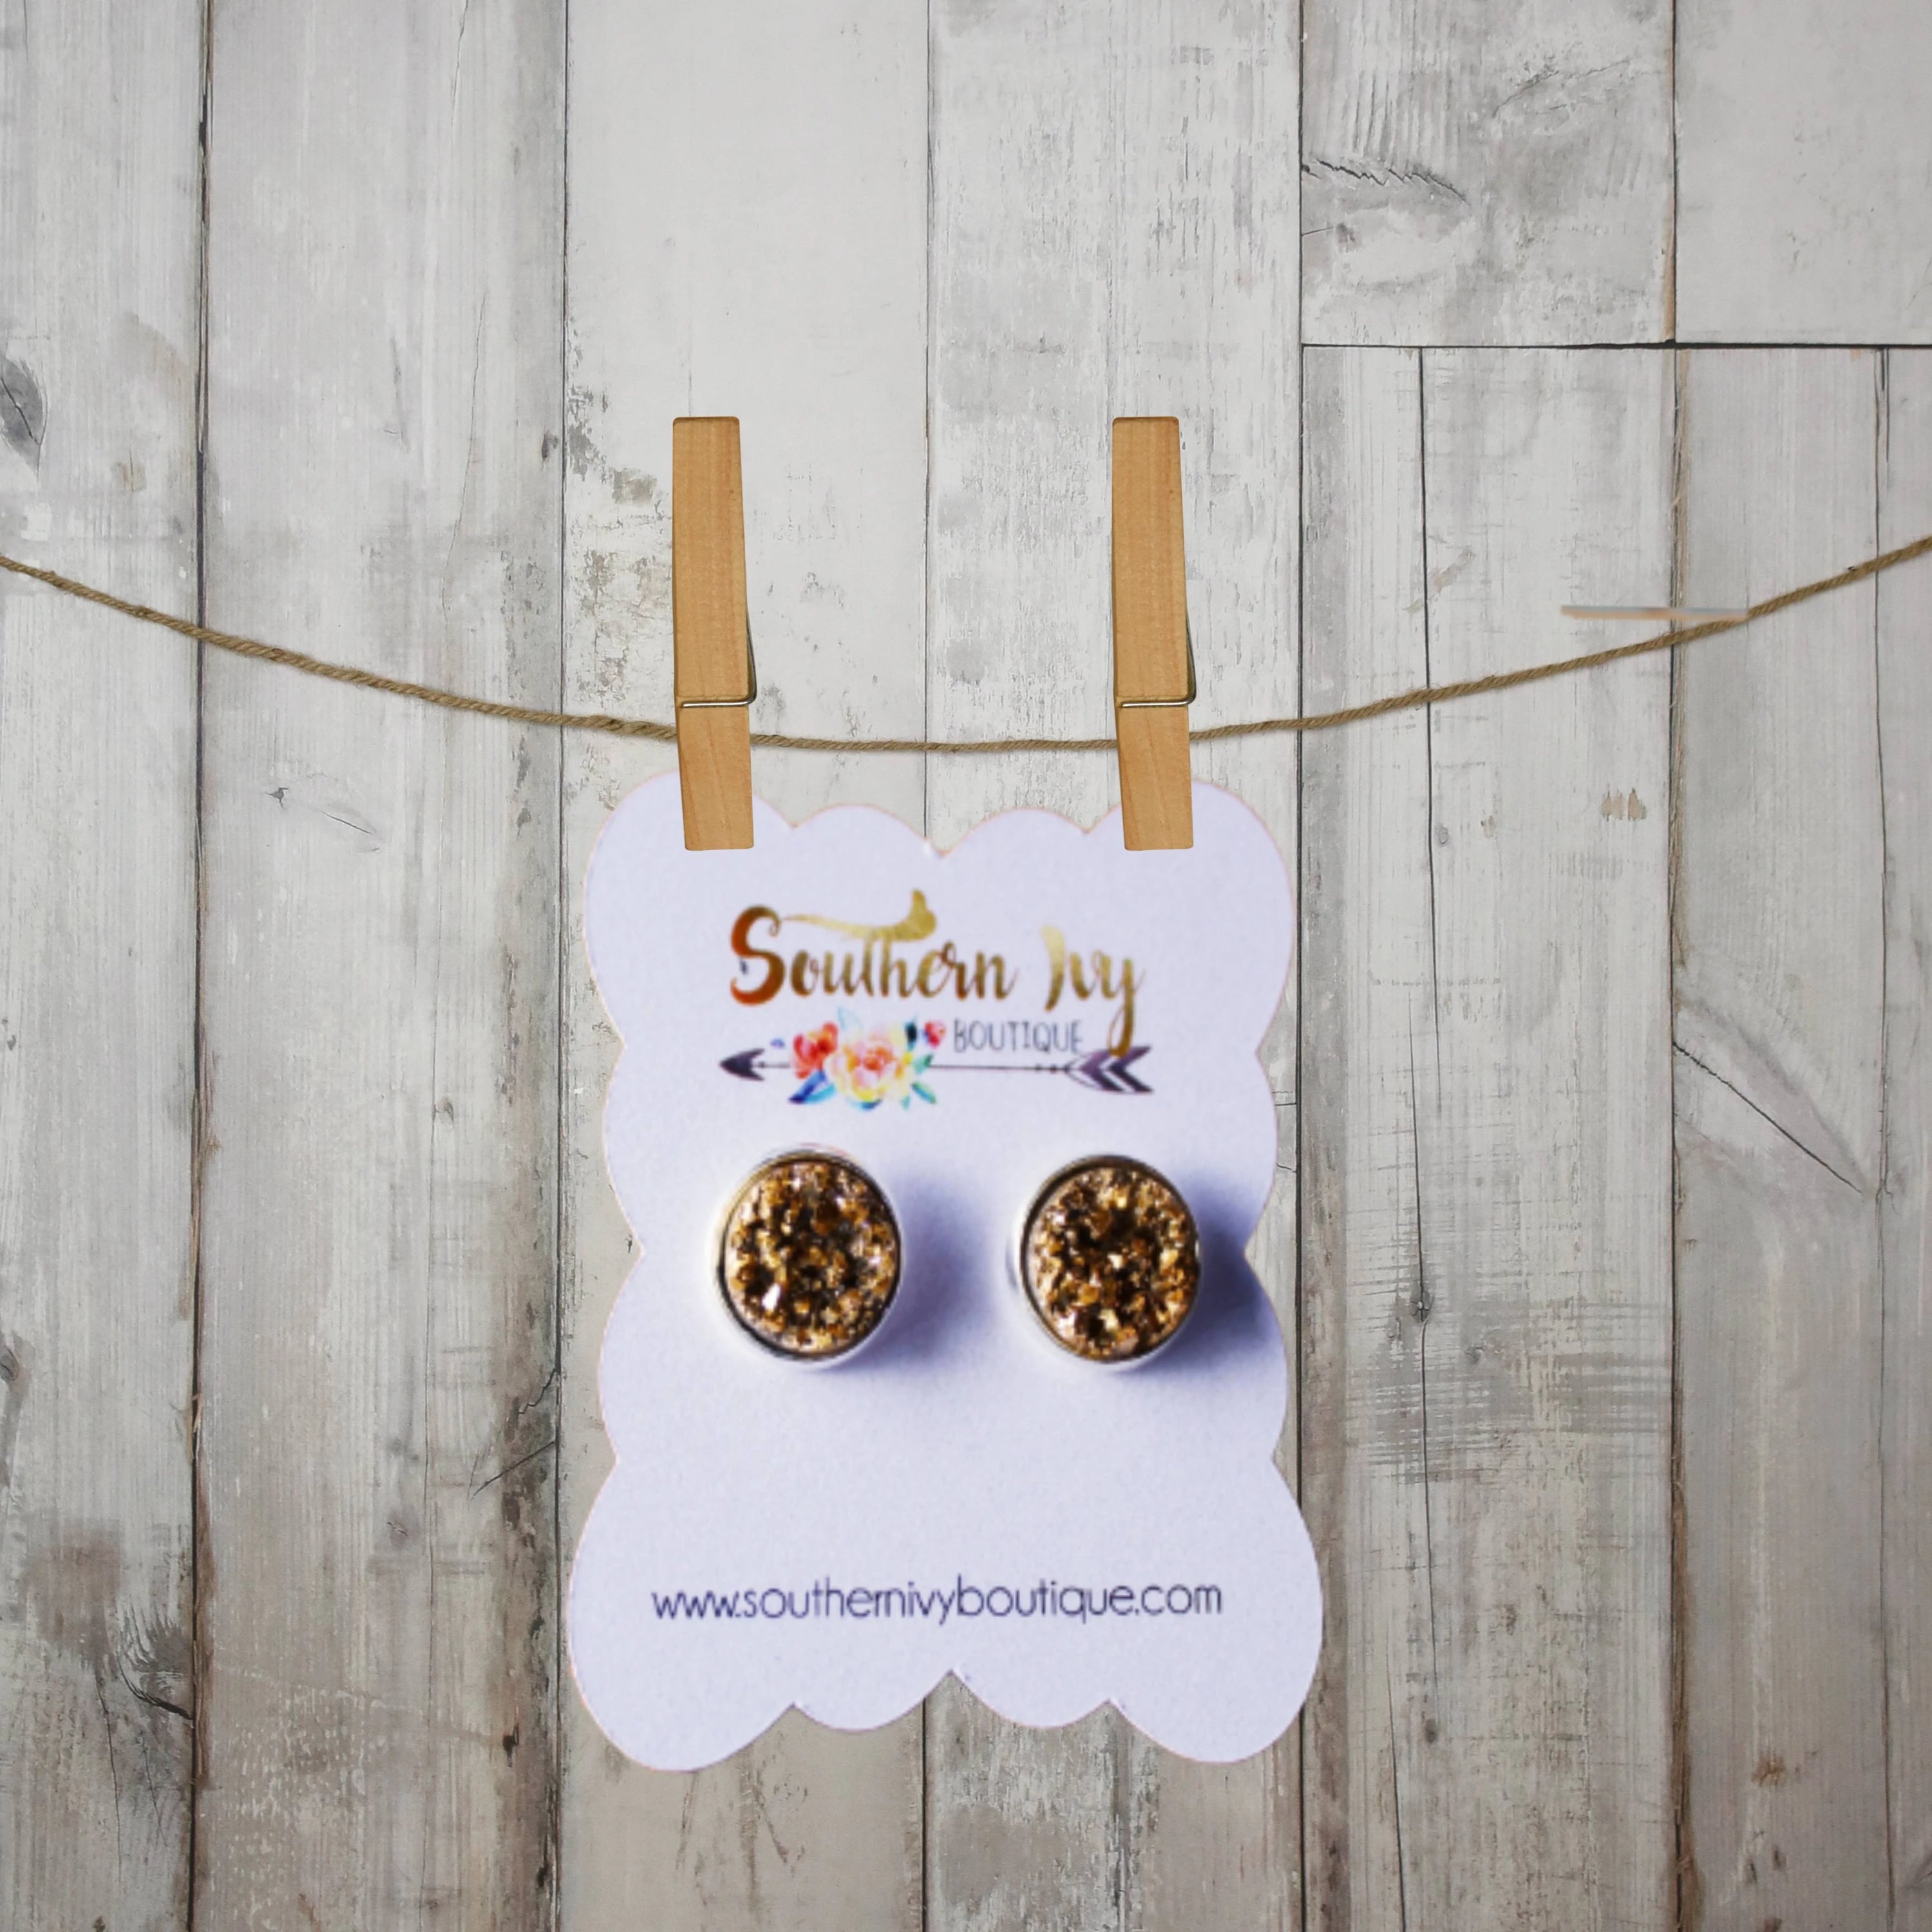 Gold & Silver Post Druzy Earring - Southern Ivy Boutique